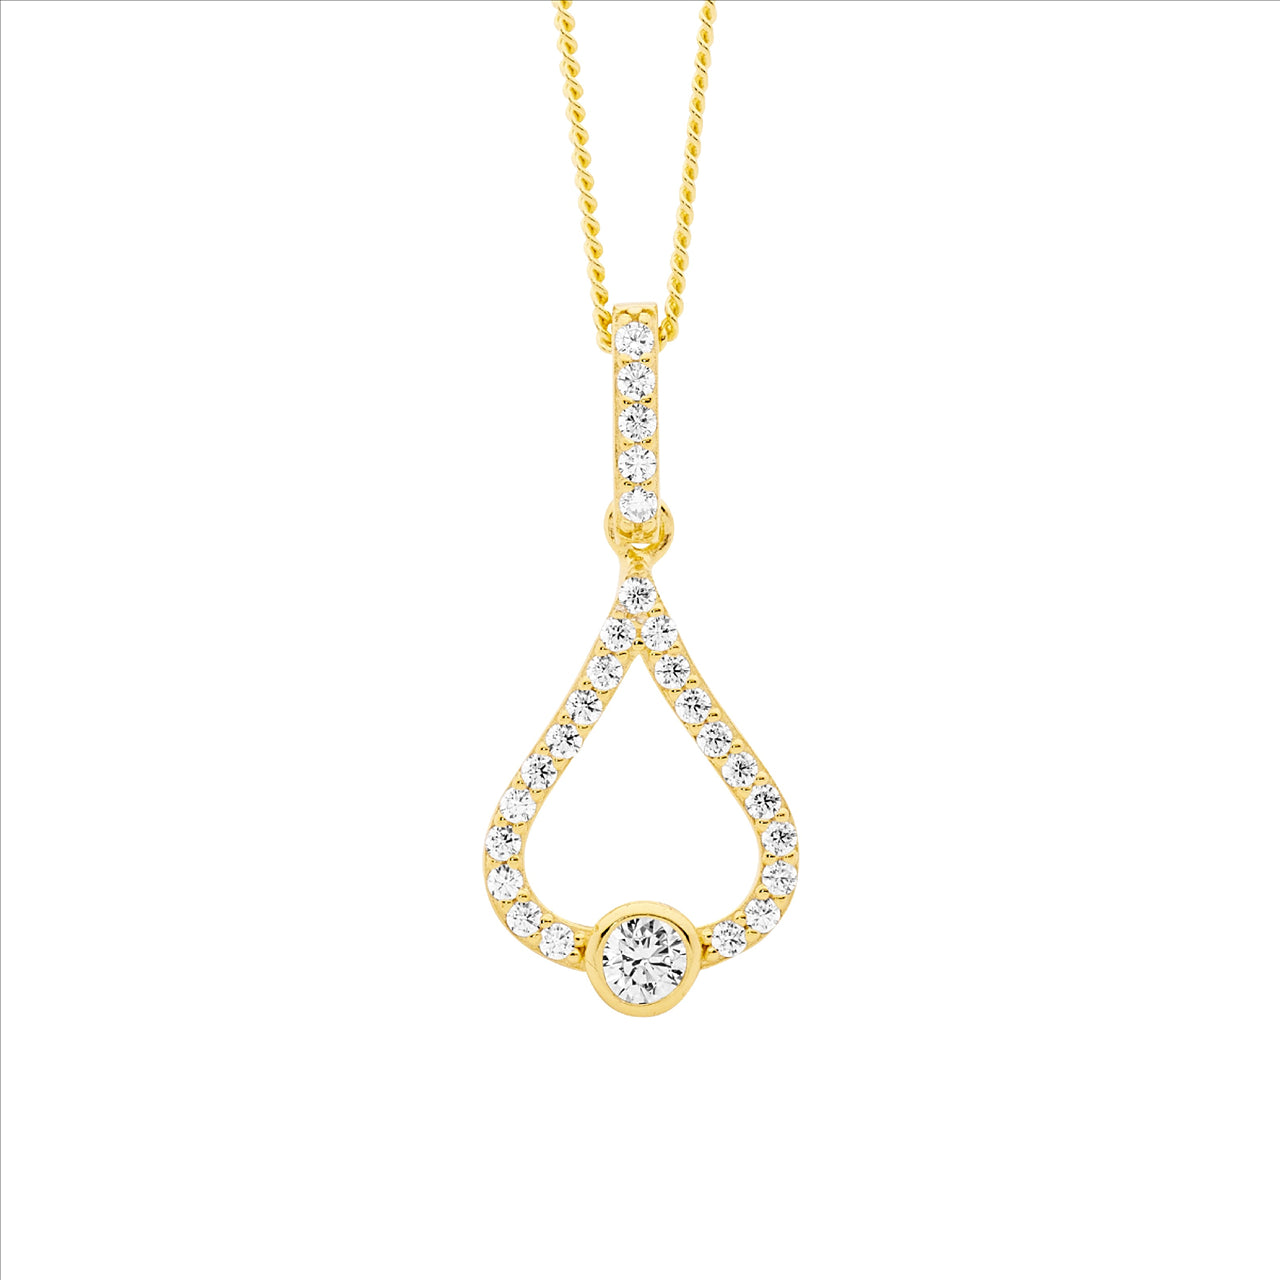 Sterling Silver Gold Plated CZ Tear Dop Pendant with 1x Bezel CZ